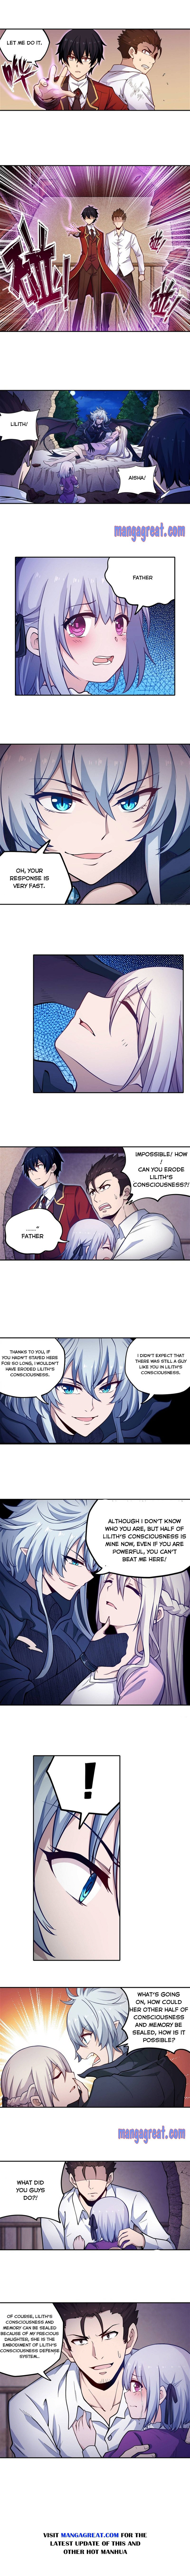 Infinite Apostles And Twelve War Girls Chapter 113 - Page 2